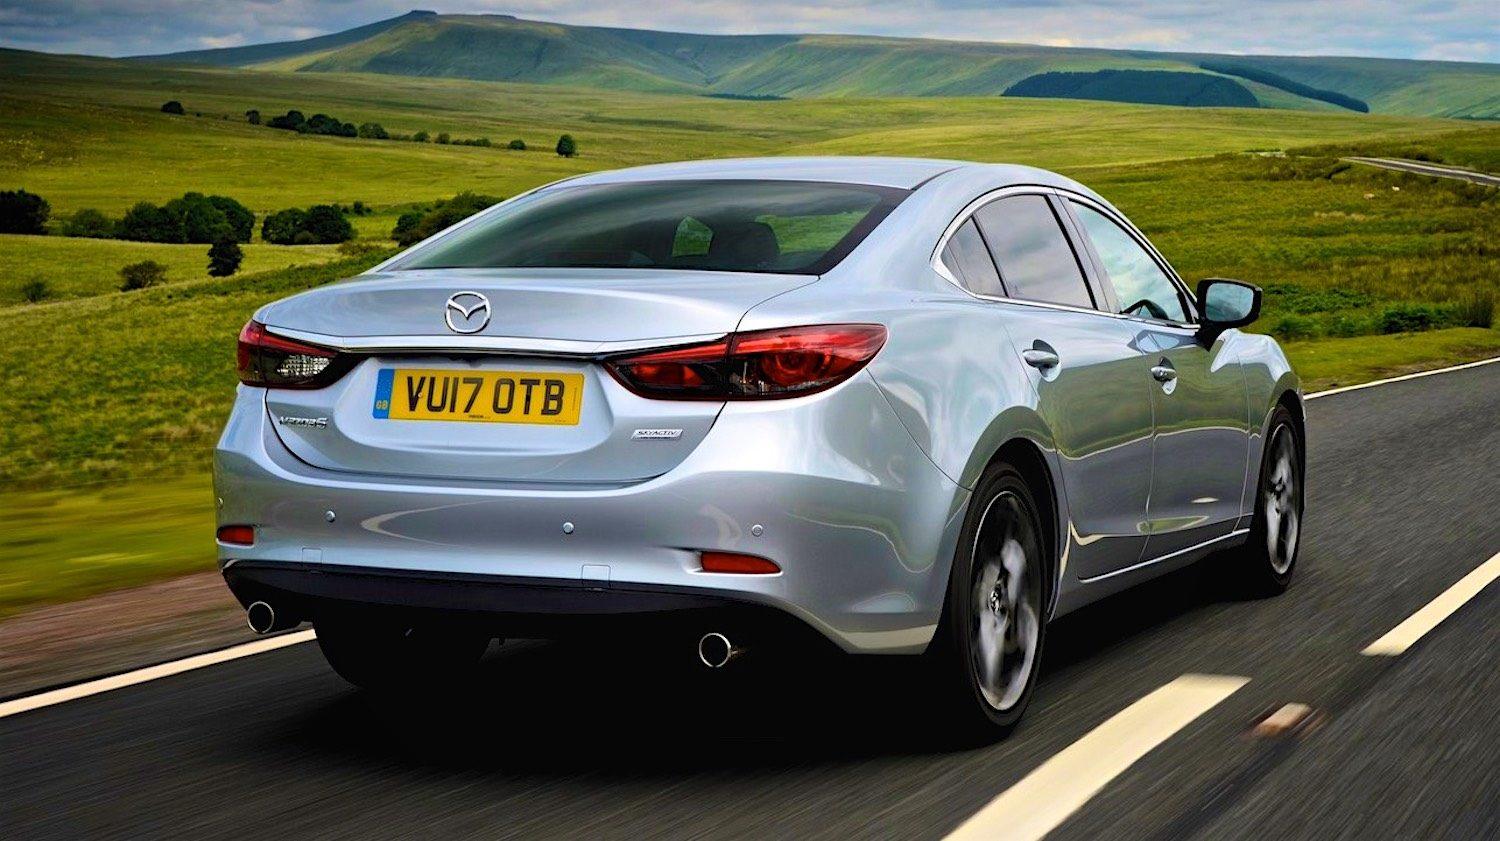 On the road with Tom Scanlan in the Mazda6 Saloon